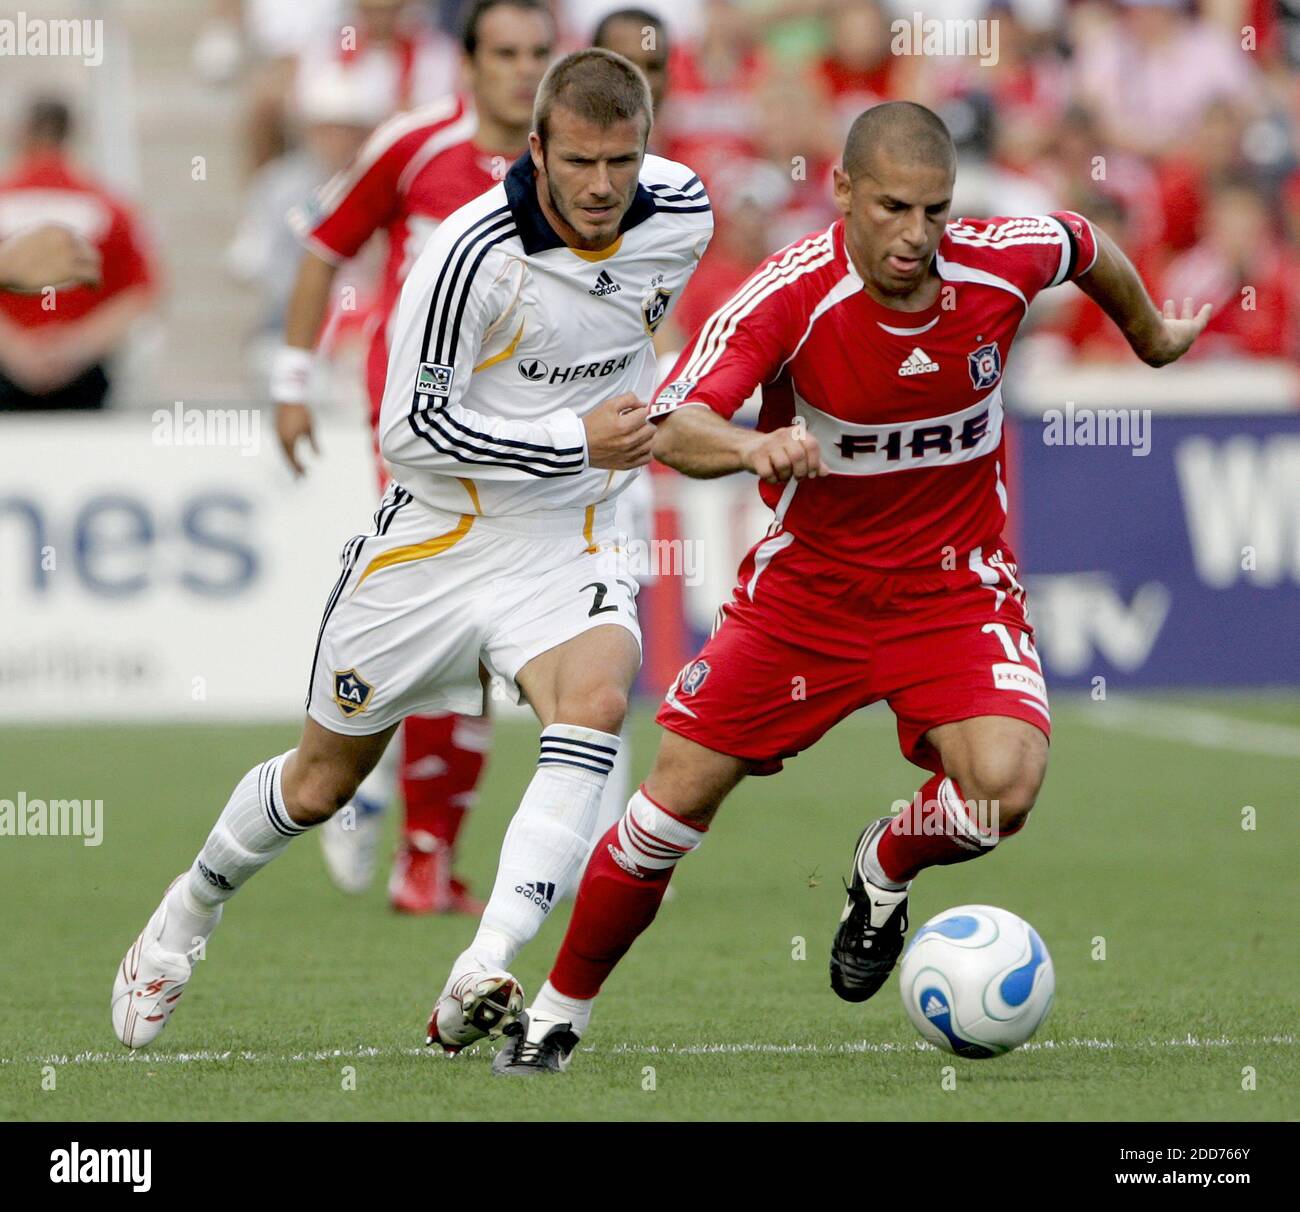 NO FILM, NO VIDEO, NO TV, NO DOCUMENTARY - Chicago Fire's Chris Armas (14) beats Los Angeles Galaxy's David Beckham (23) to the ball in the second half at Toyota Park in Bridgeview, IL, USA on October 21, 2007. The Fire beat the Galaxy 1-0. Photo by Jose M. Osorio/Chicago Tribune/MCT/Cameleon/ABACAPRESS.COM Stock Photo